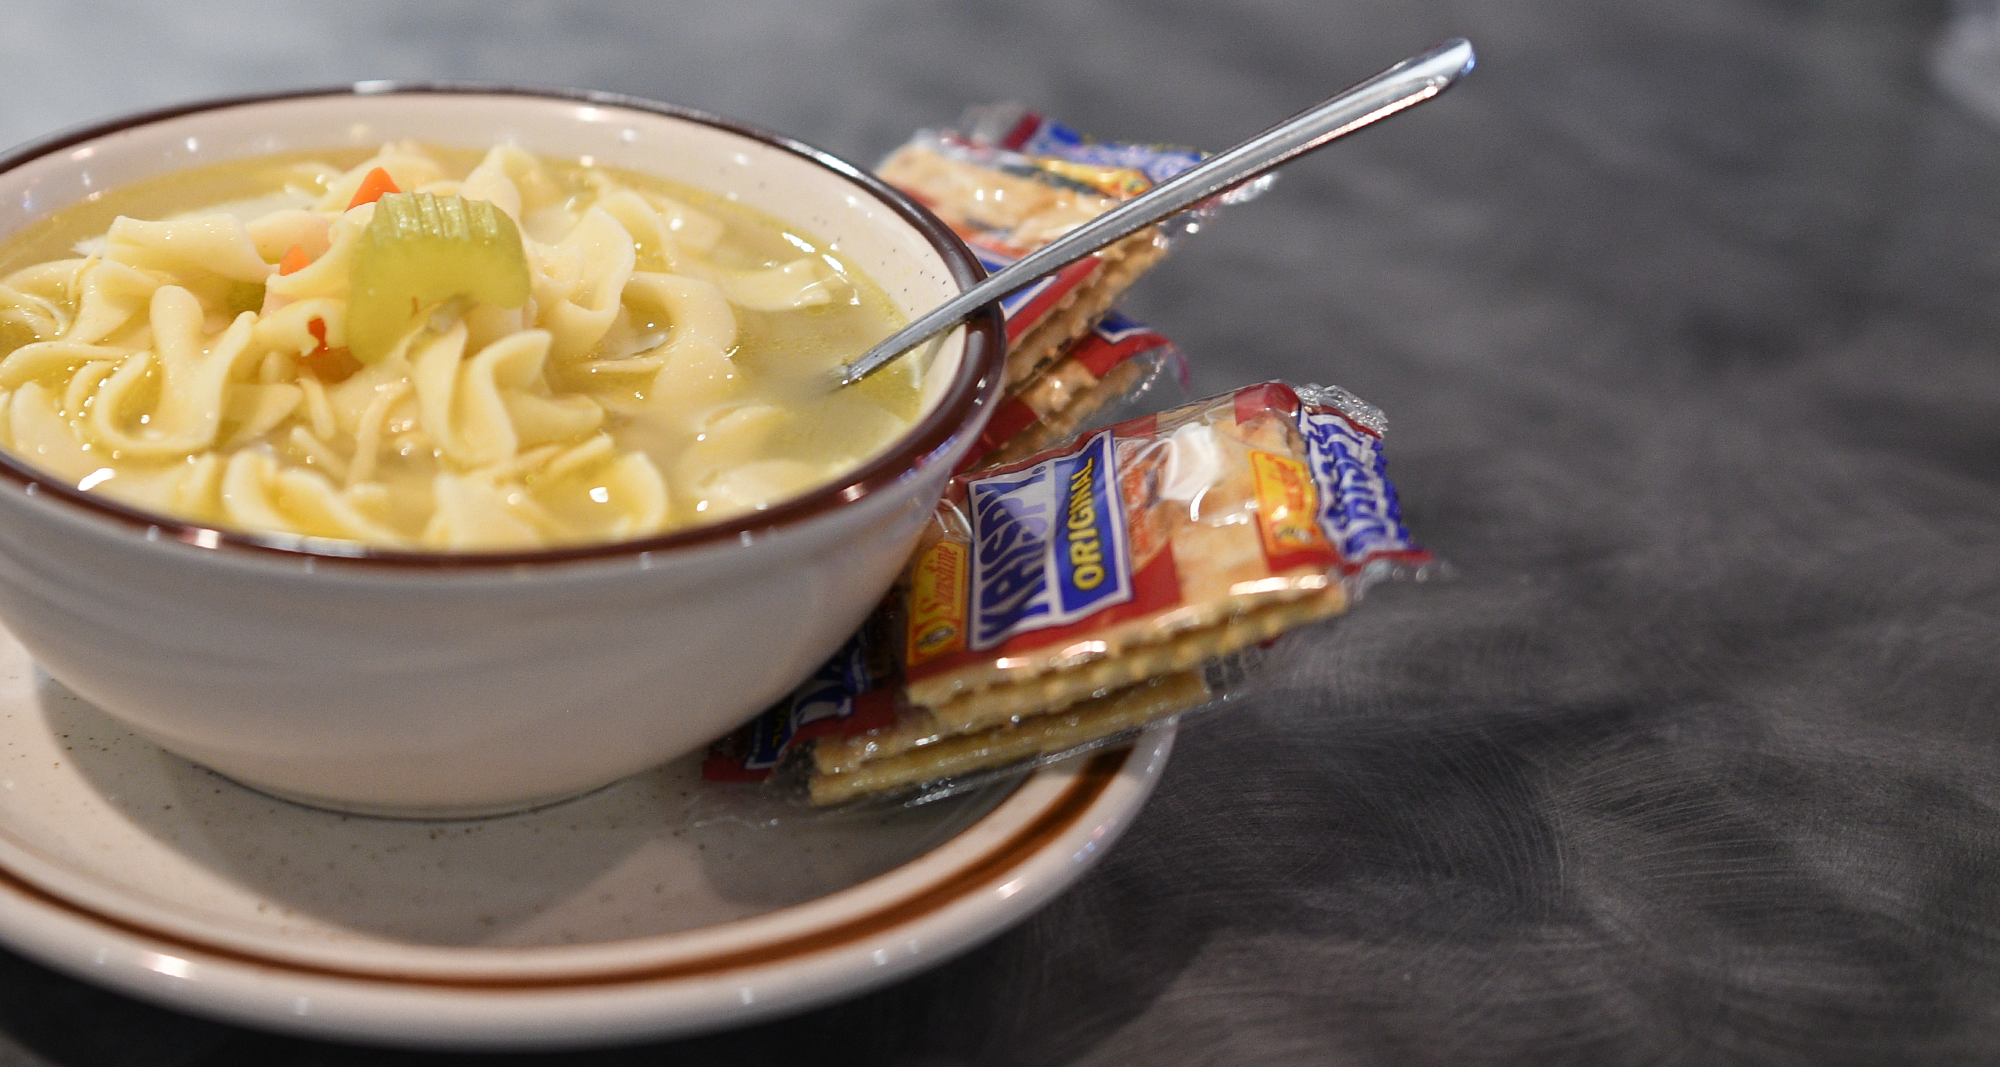 Corner Coffee Shoppe's Chicken Noodle Soup with Crackers